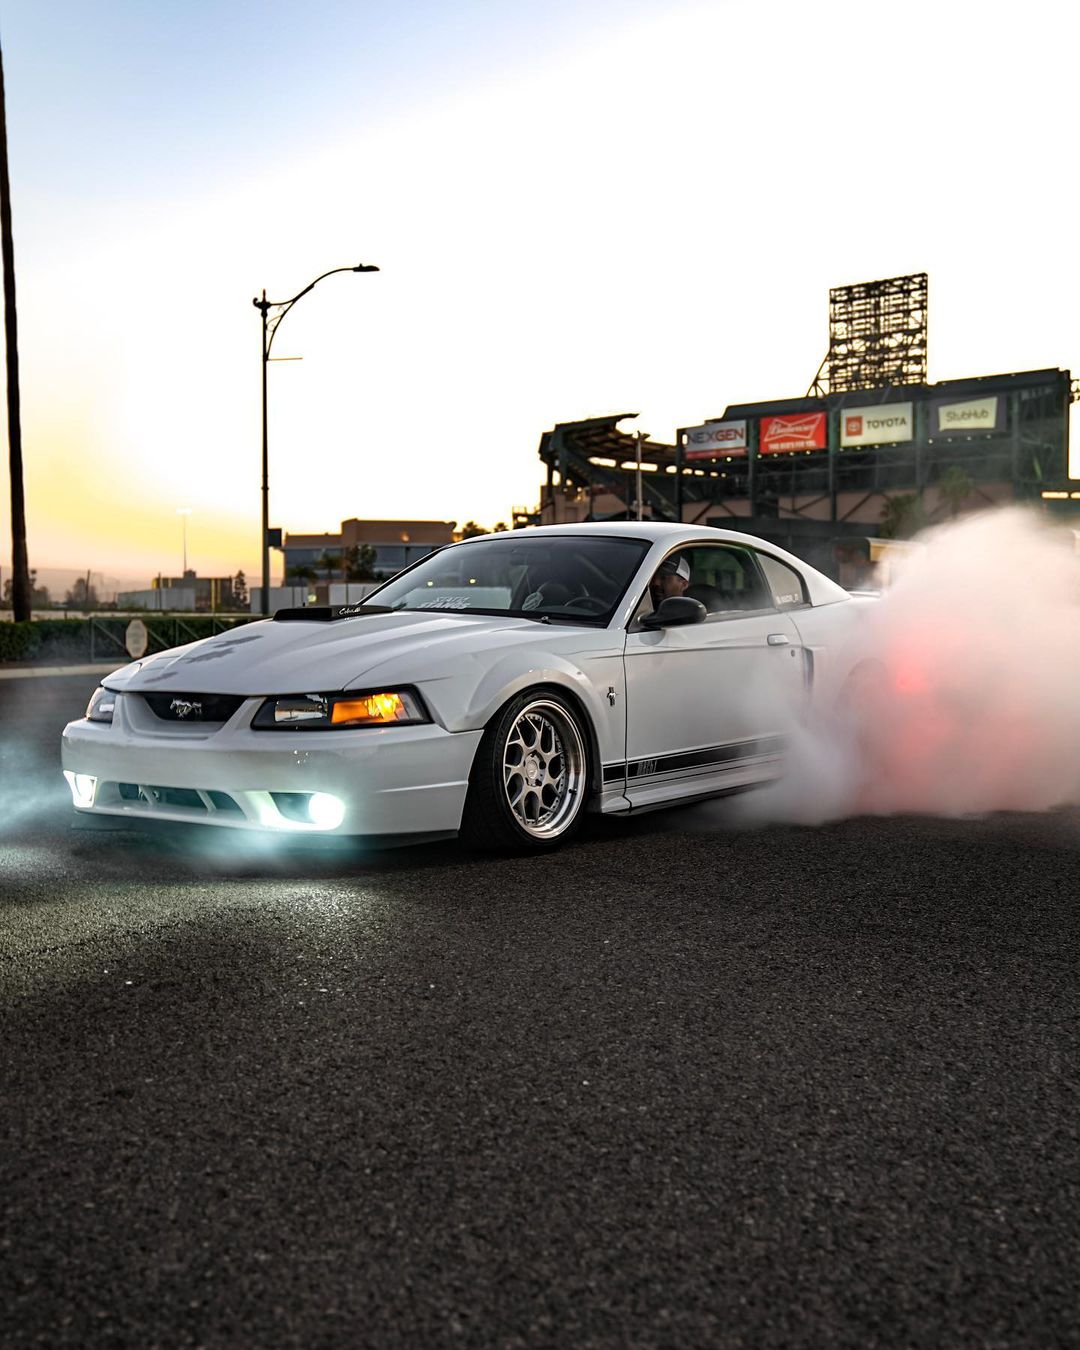 2003 Ford Mustang Mach 1 New Edge Burnout